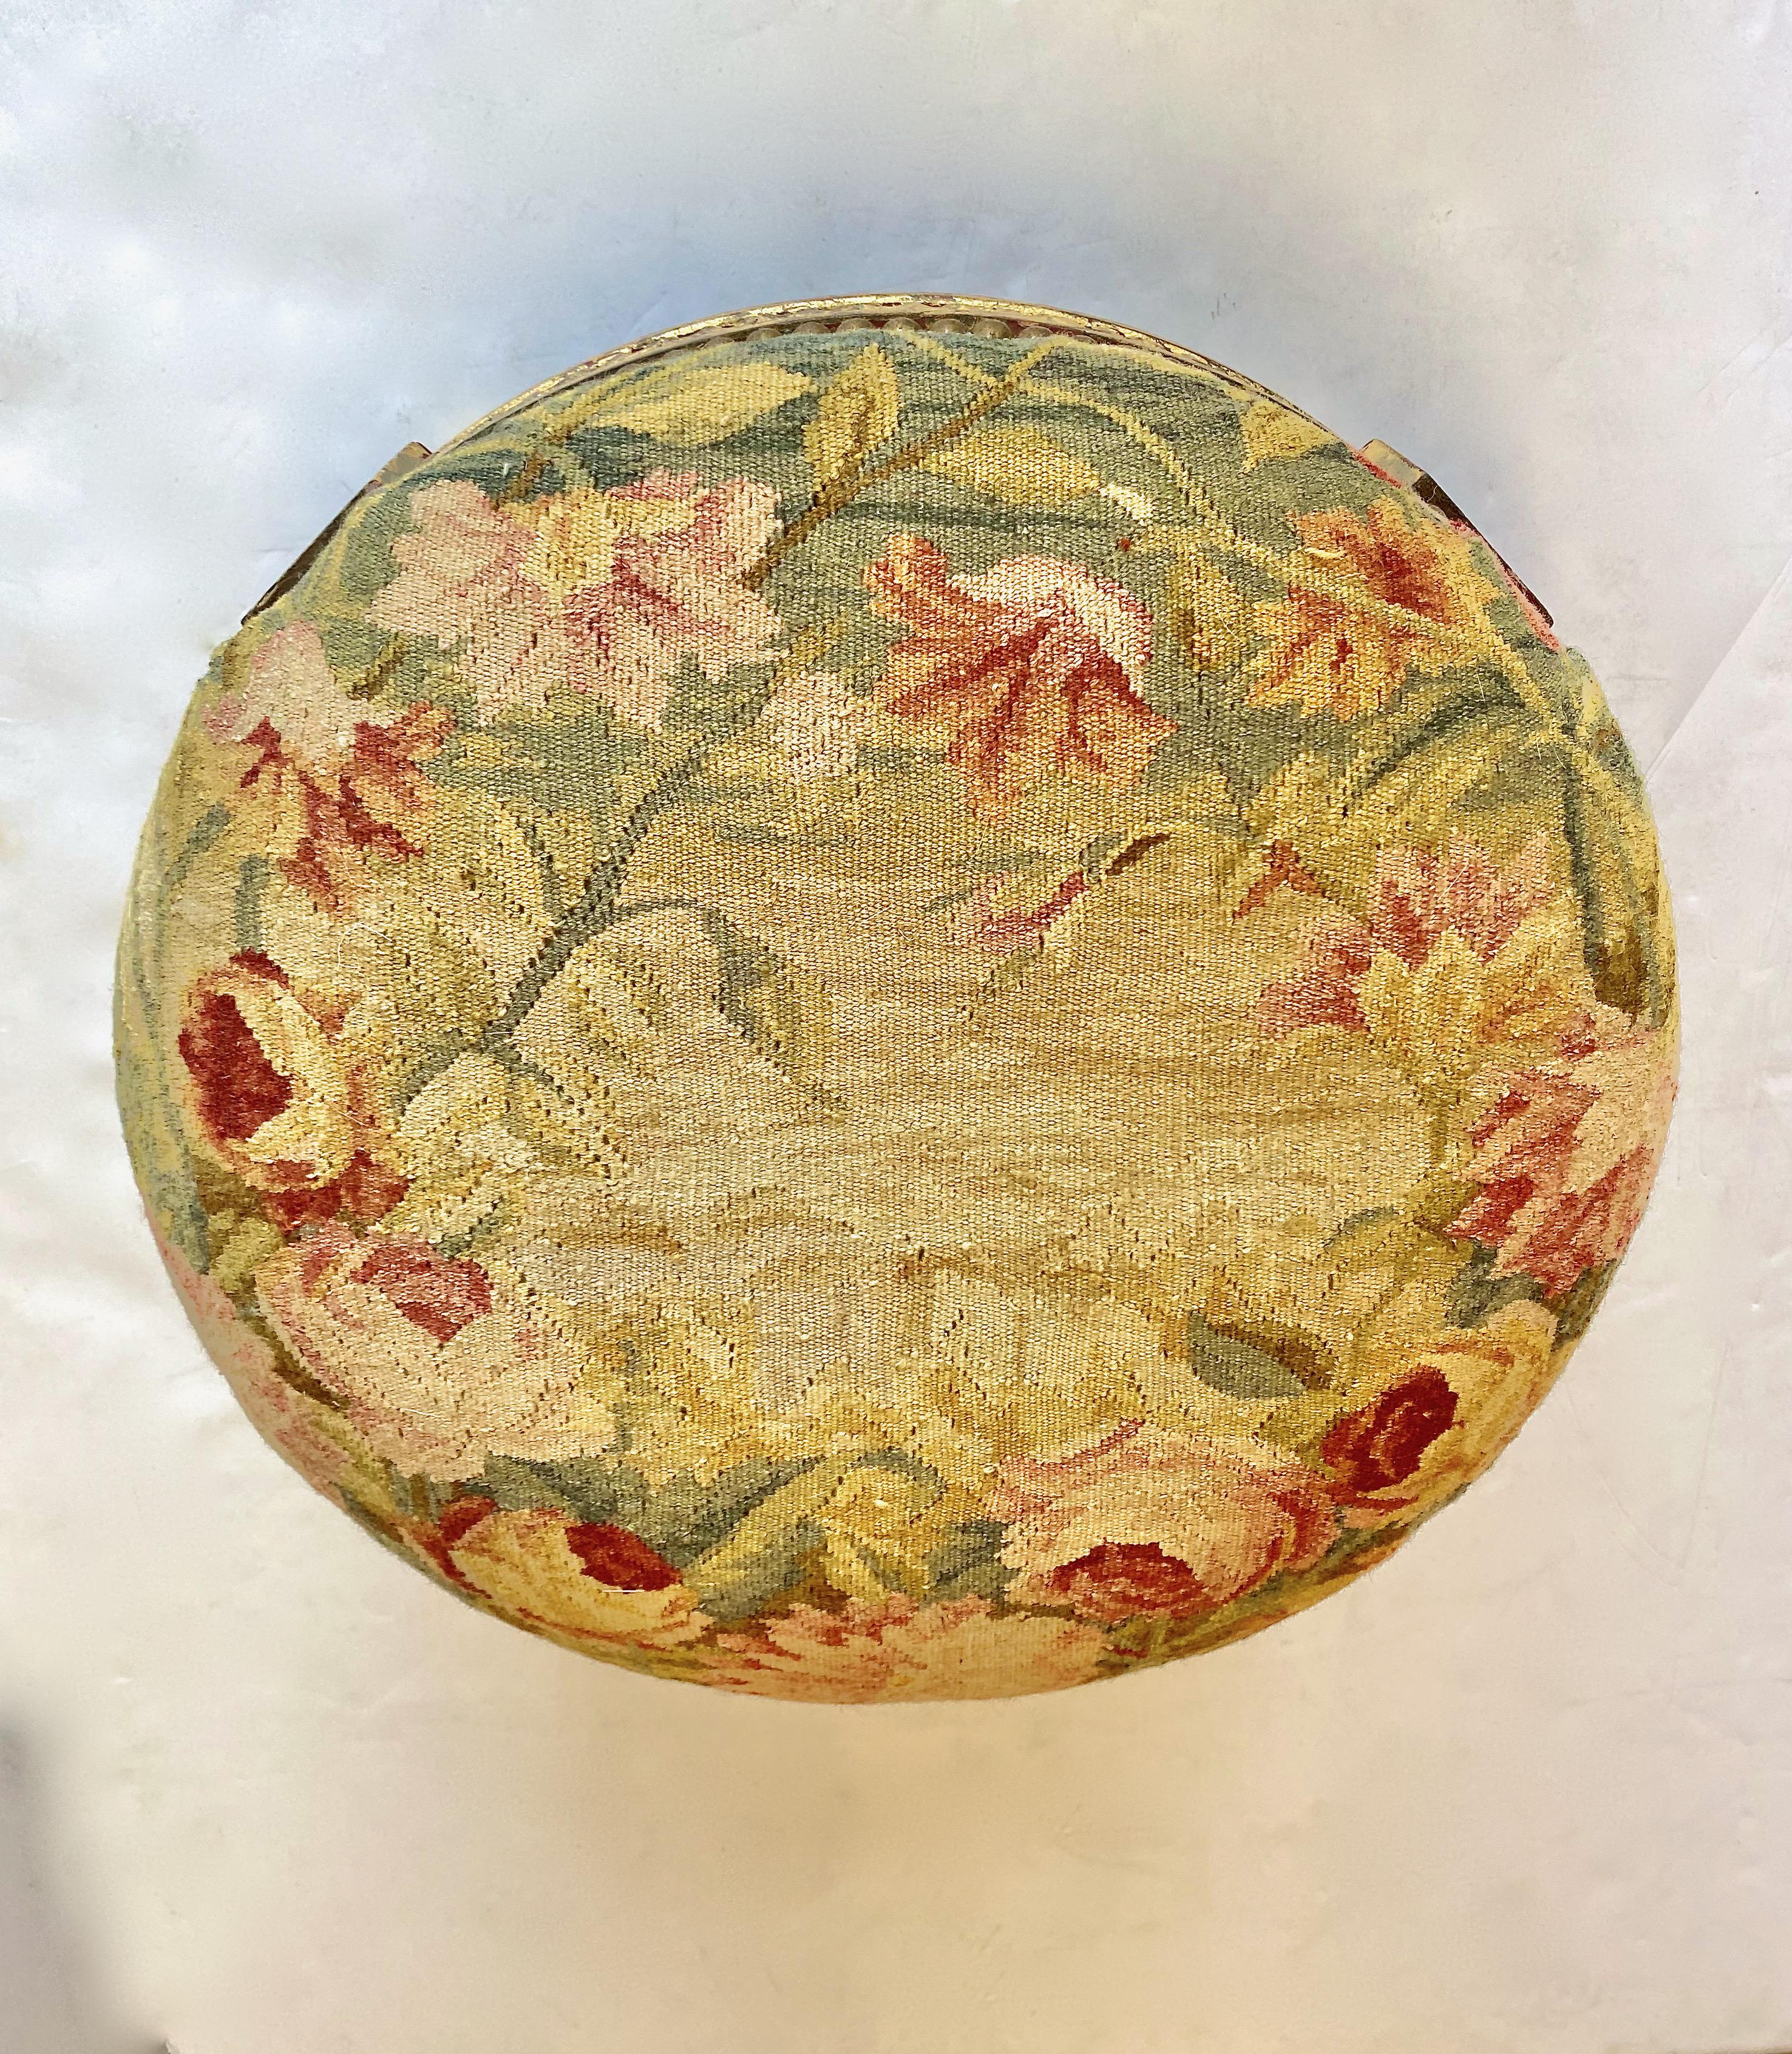 This is a charming little footstool in the style of Louis XVI. The carved wood frame is highlighted with gold leaf. The seat or footrest is covered in an antique floral Flemish or French tapestry fragment. This is a sexy little stool and it is ready